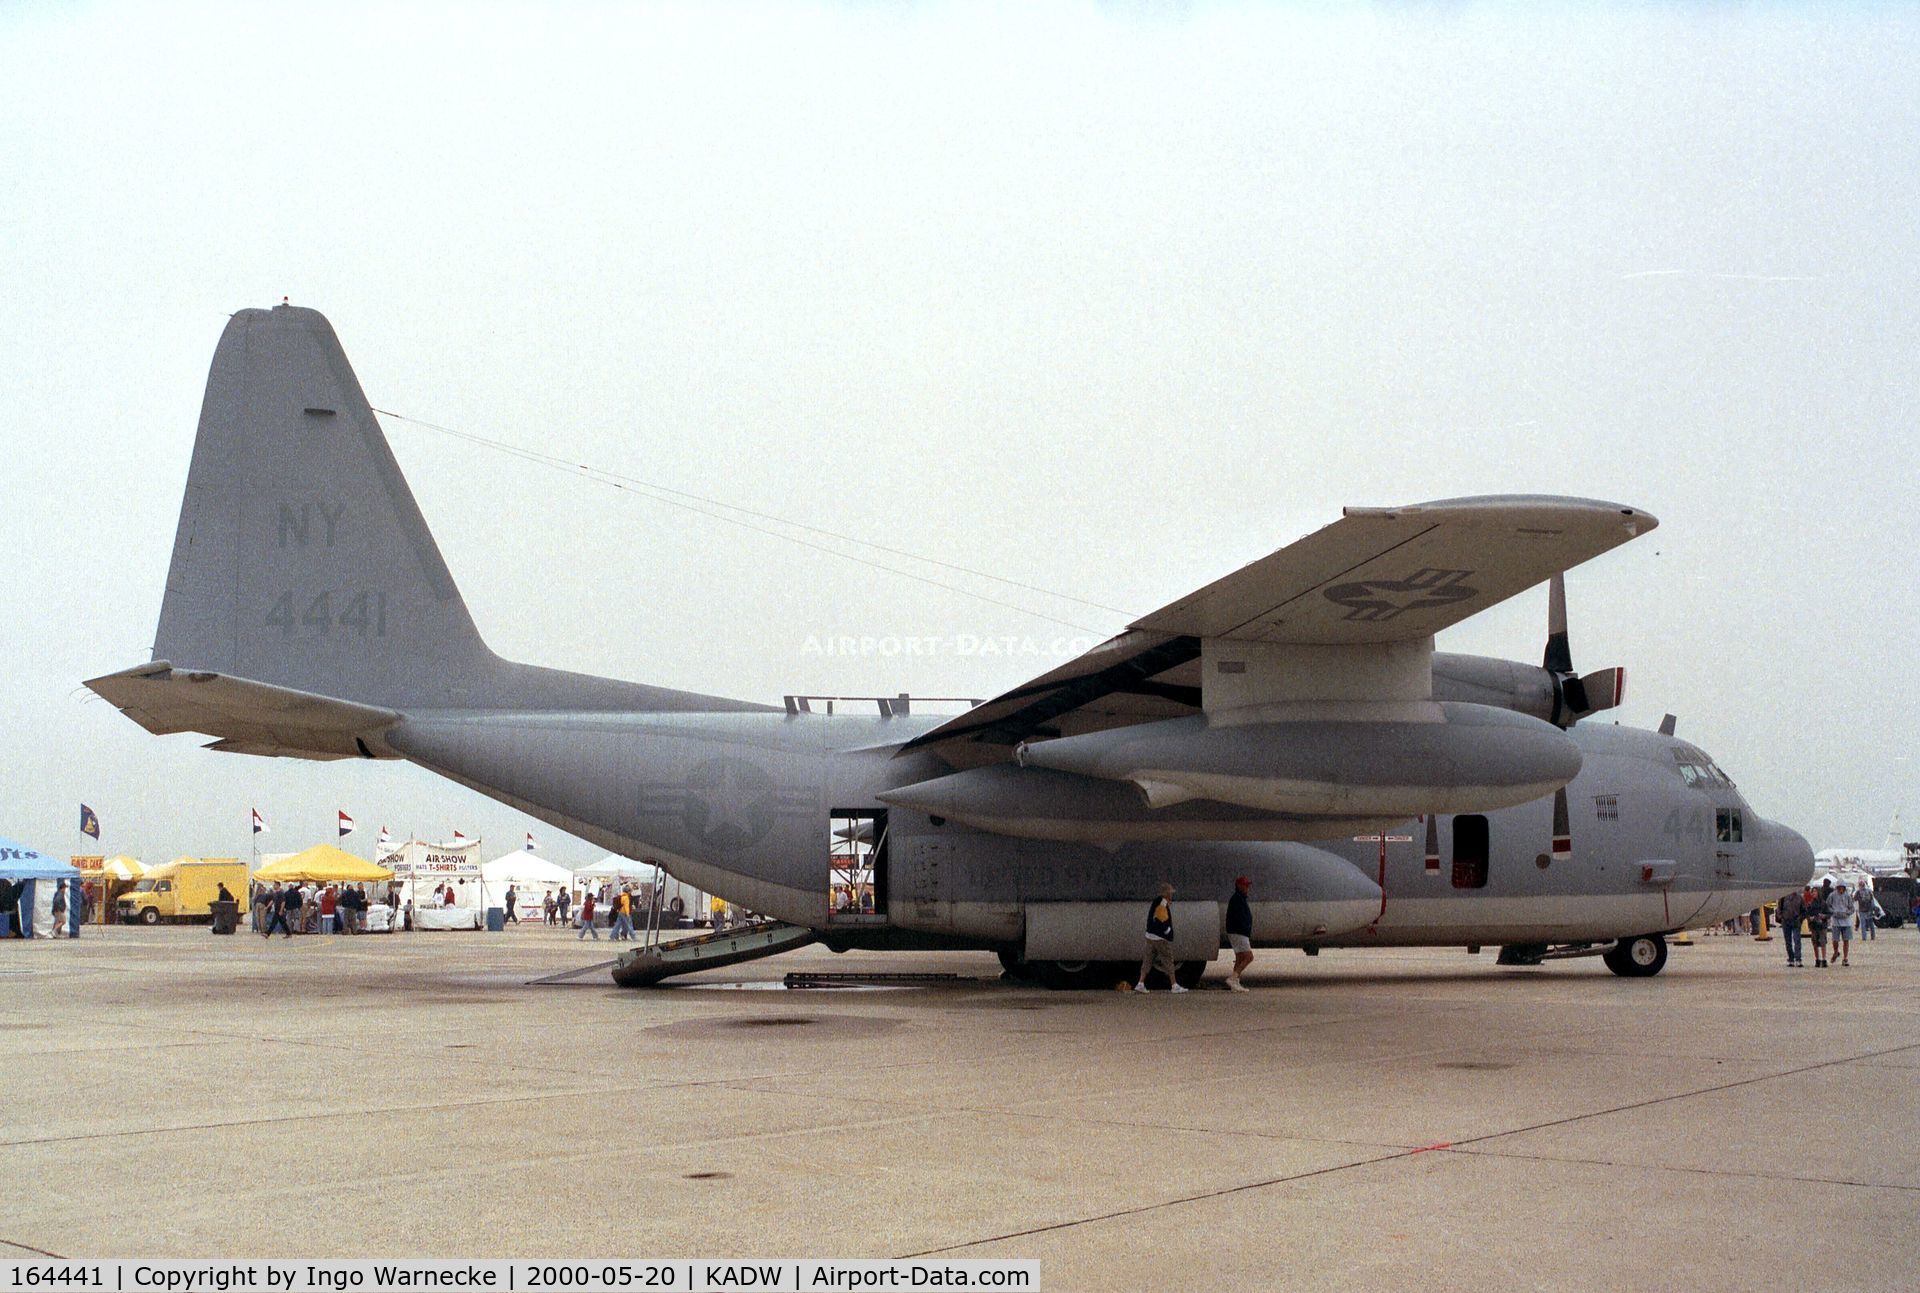 164441, Lockheed KC-130T Hercules C/N 382-5219, Lockheed KC-130T Hercules of the US Navy at Andrews AFB during Armed Forces Day